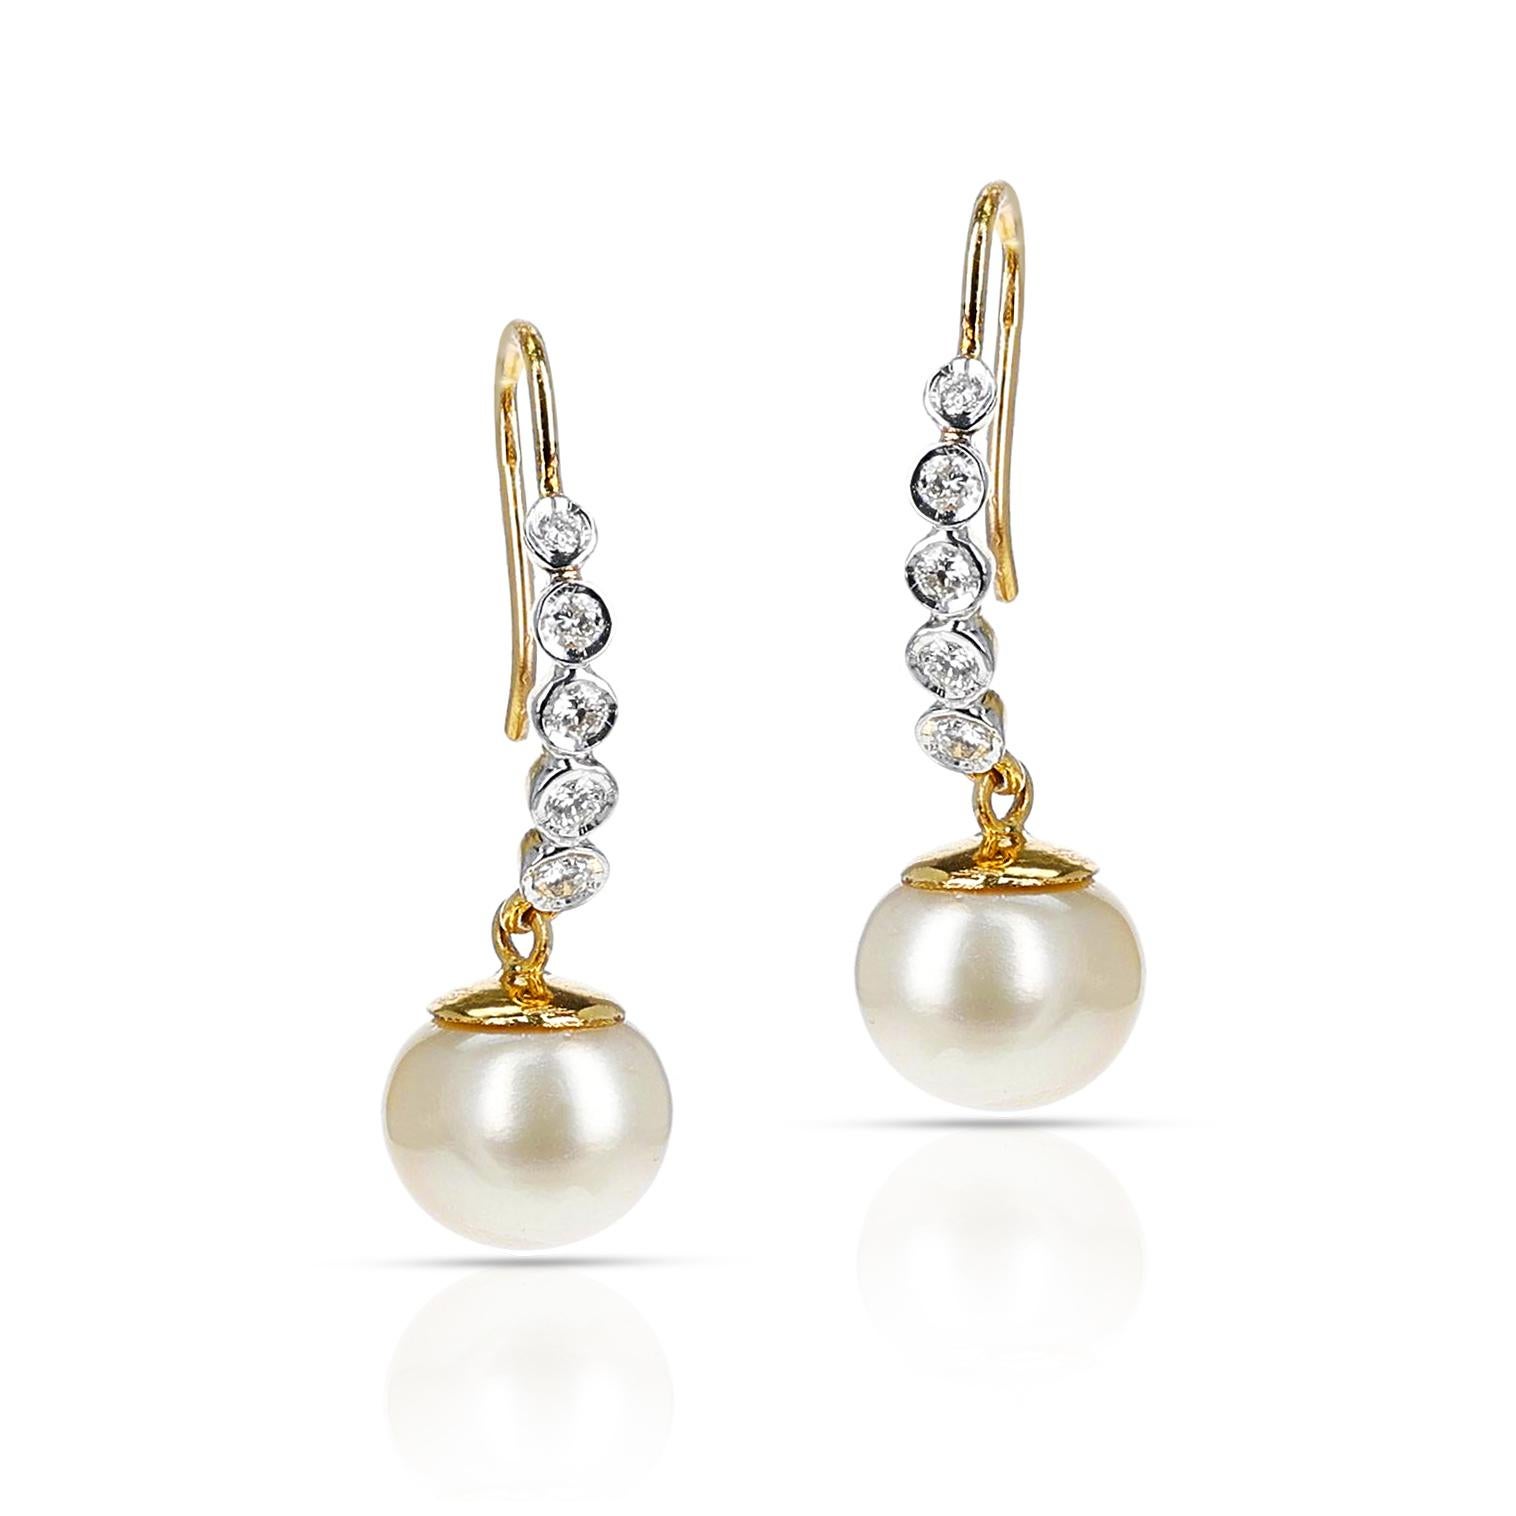 16.06 Ct. South Sea Pearl Dangling Earrings with 0.43 Ct. Diamonds, 14K In Excellent Condition For Sale In New York, NY